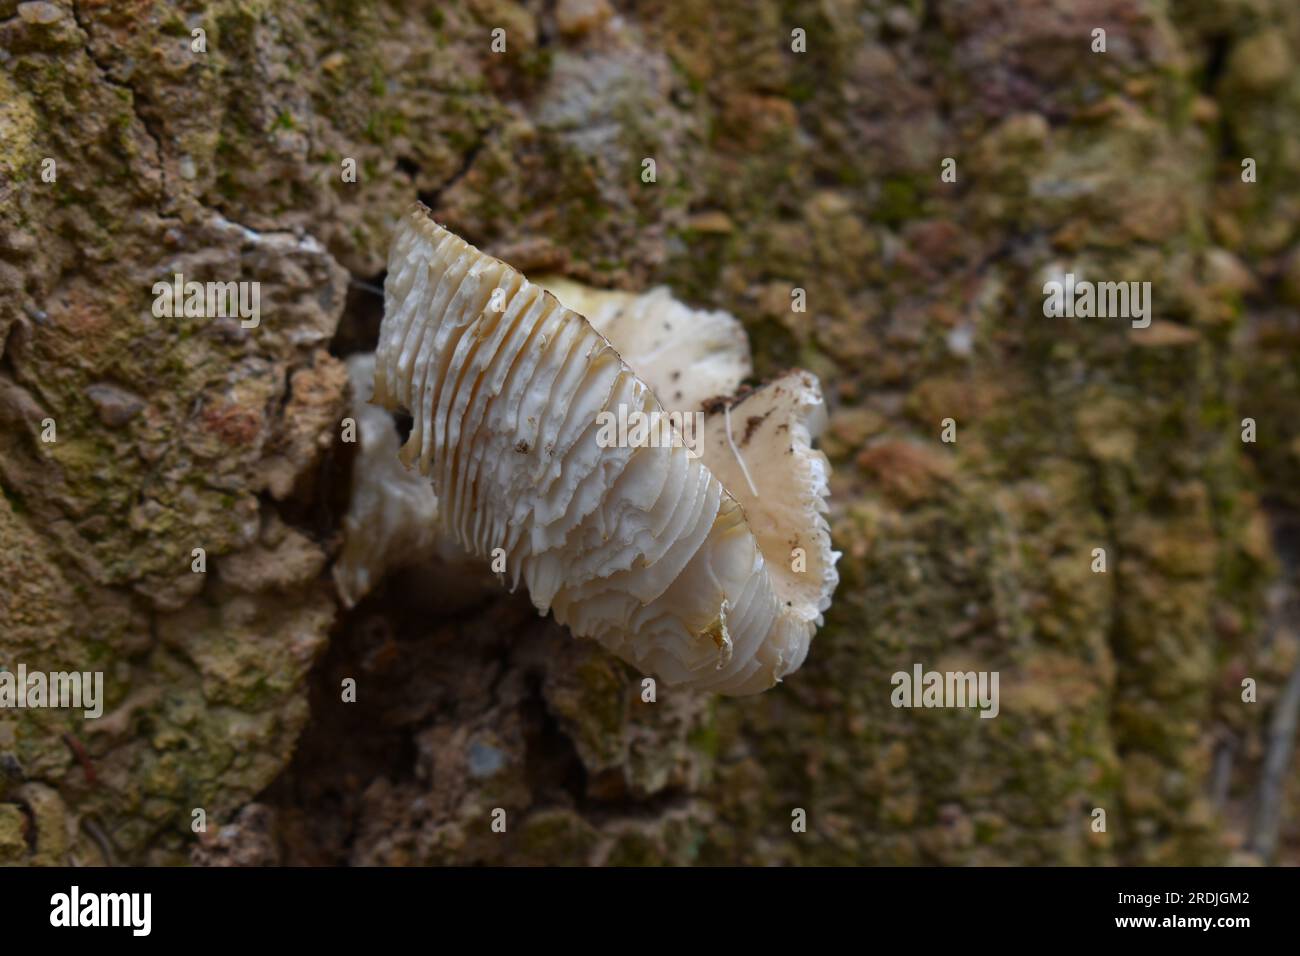 Mushroom growing in Portuguese forest Stock Photo